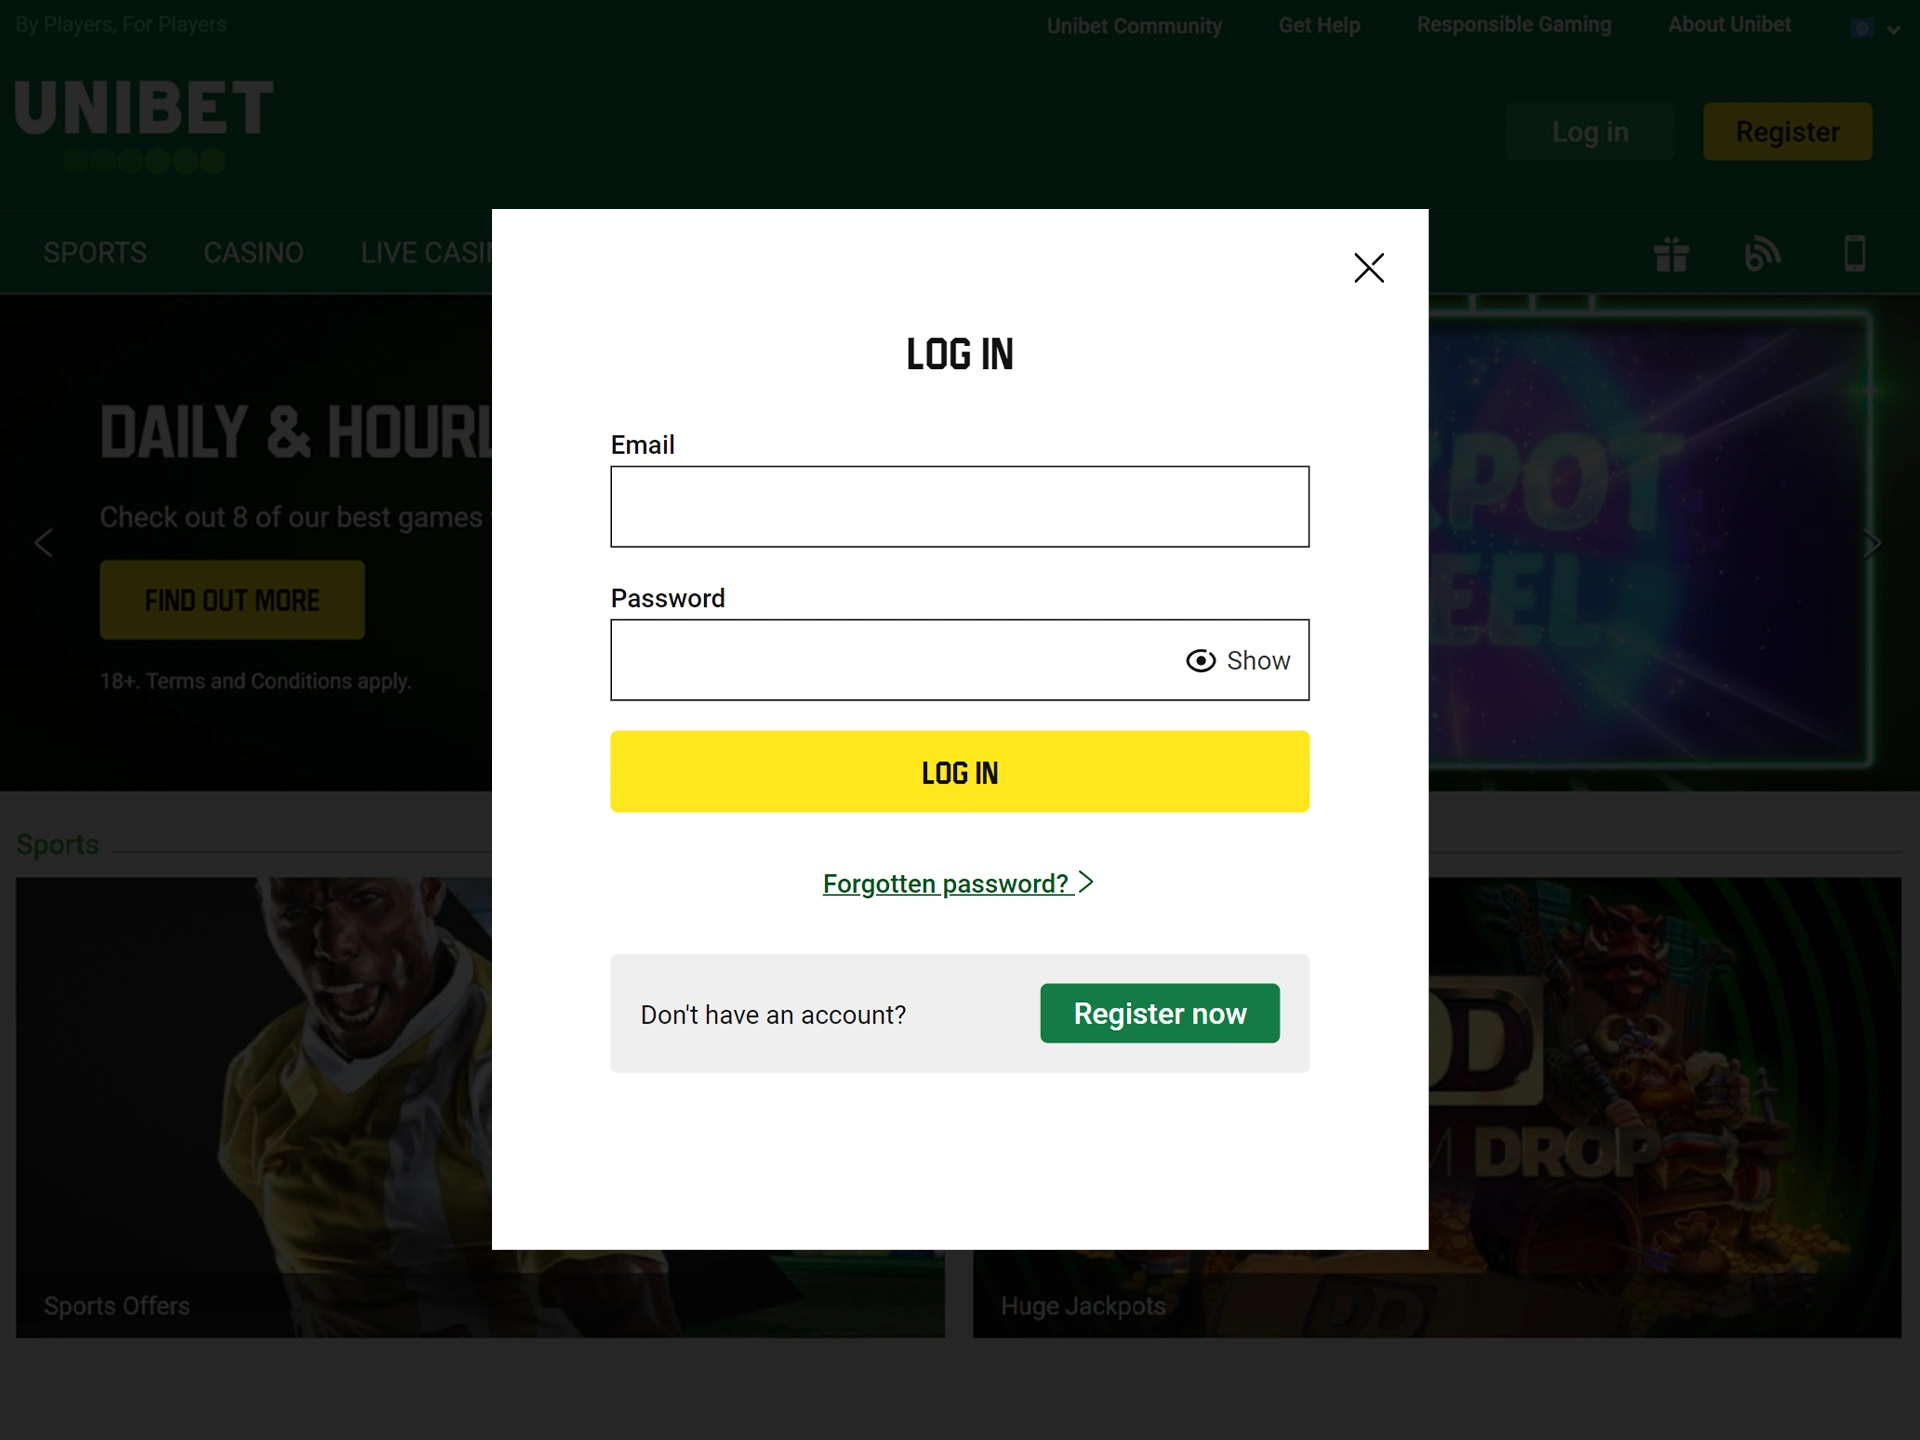 Log in to your Unibet account and enjoy the game.